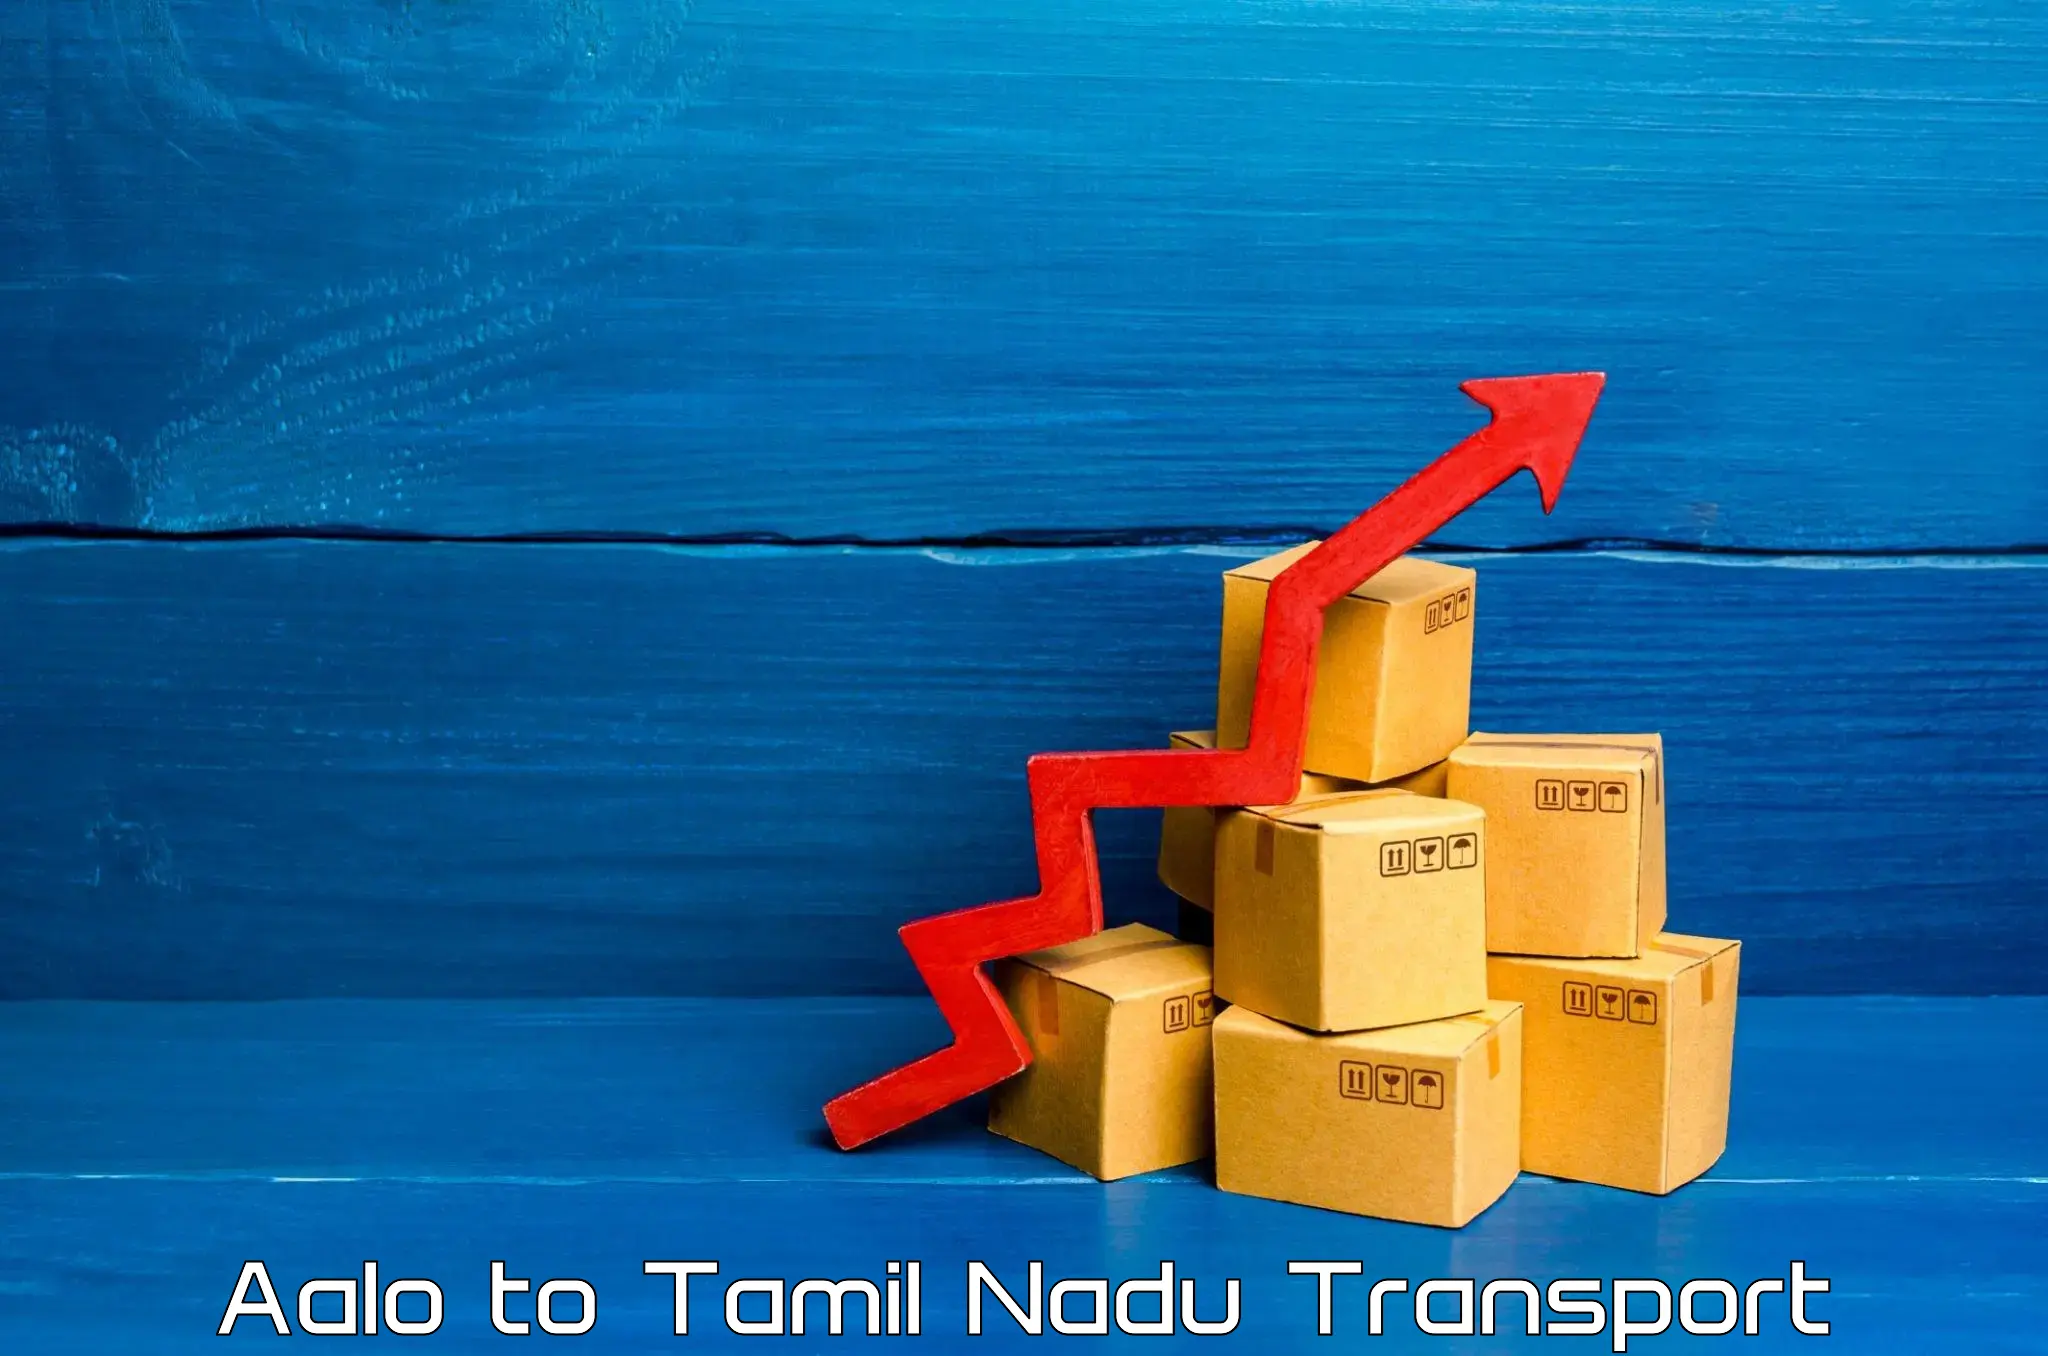 Domestic goods transportation services Aalo to Tamil Nadu